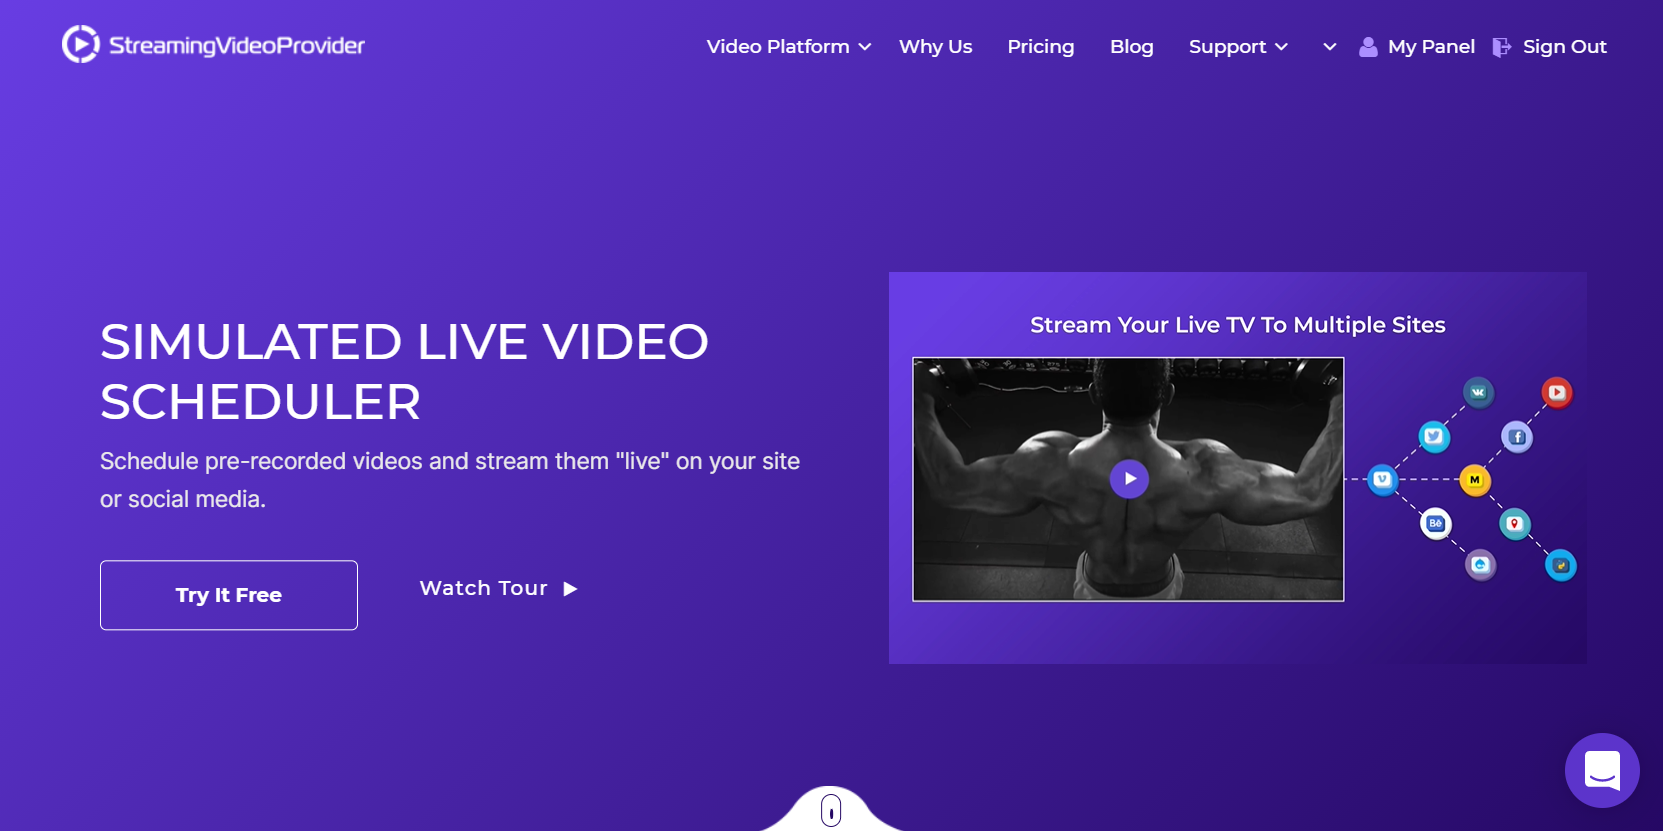 Schedule and Stream Pre-recorded Videos Live